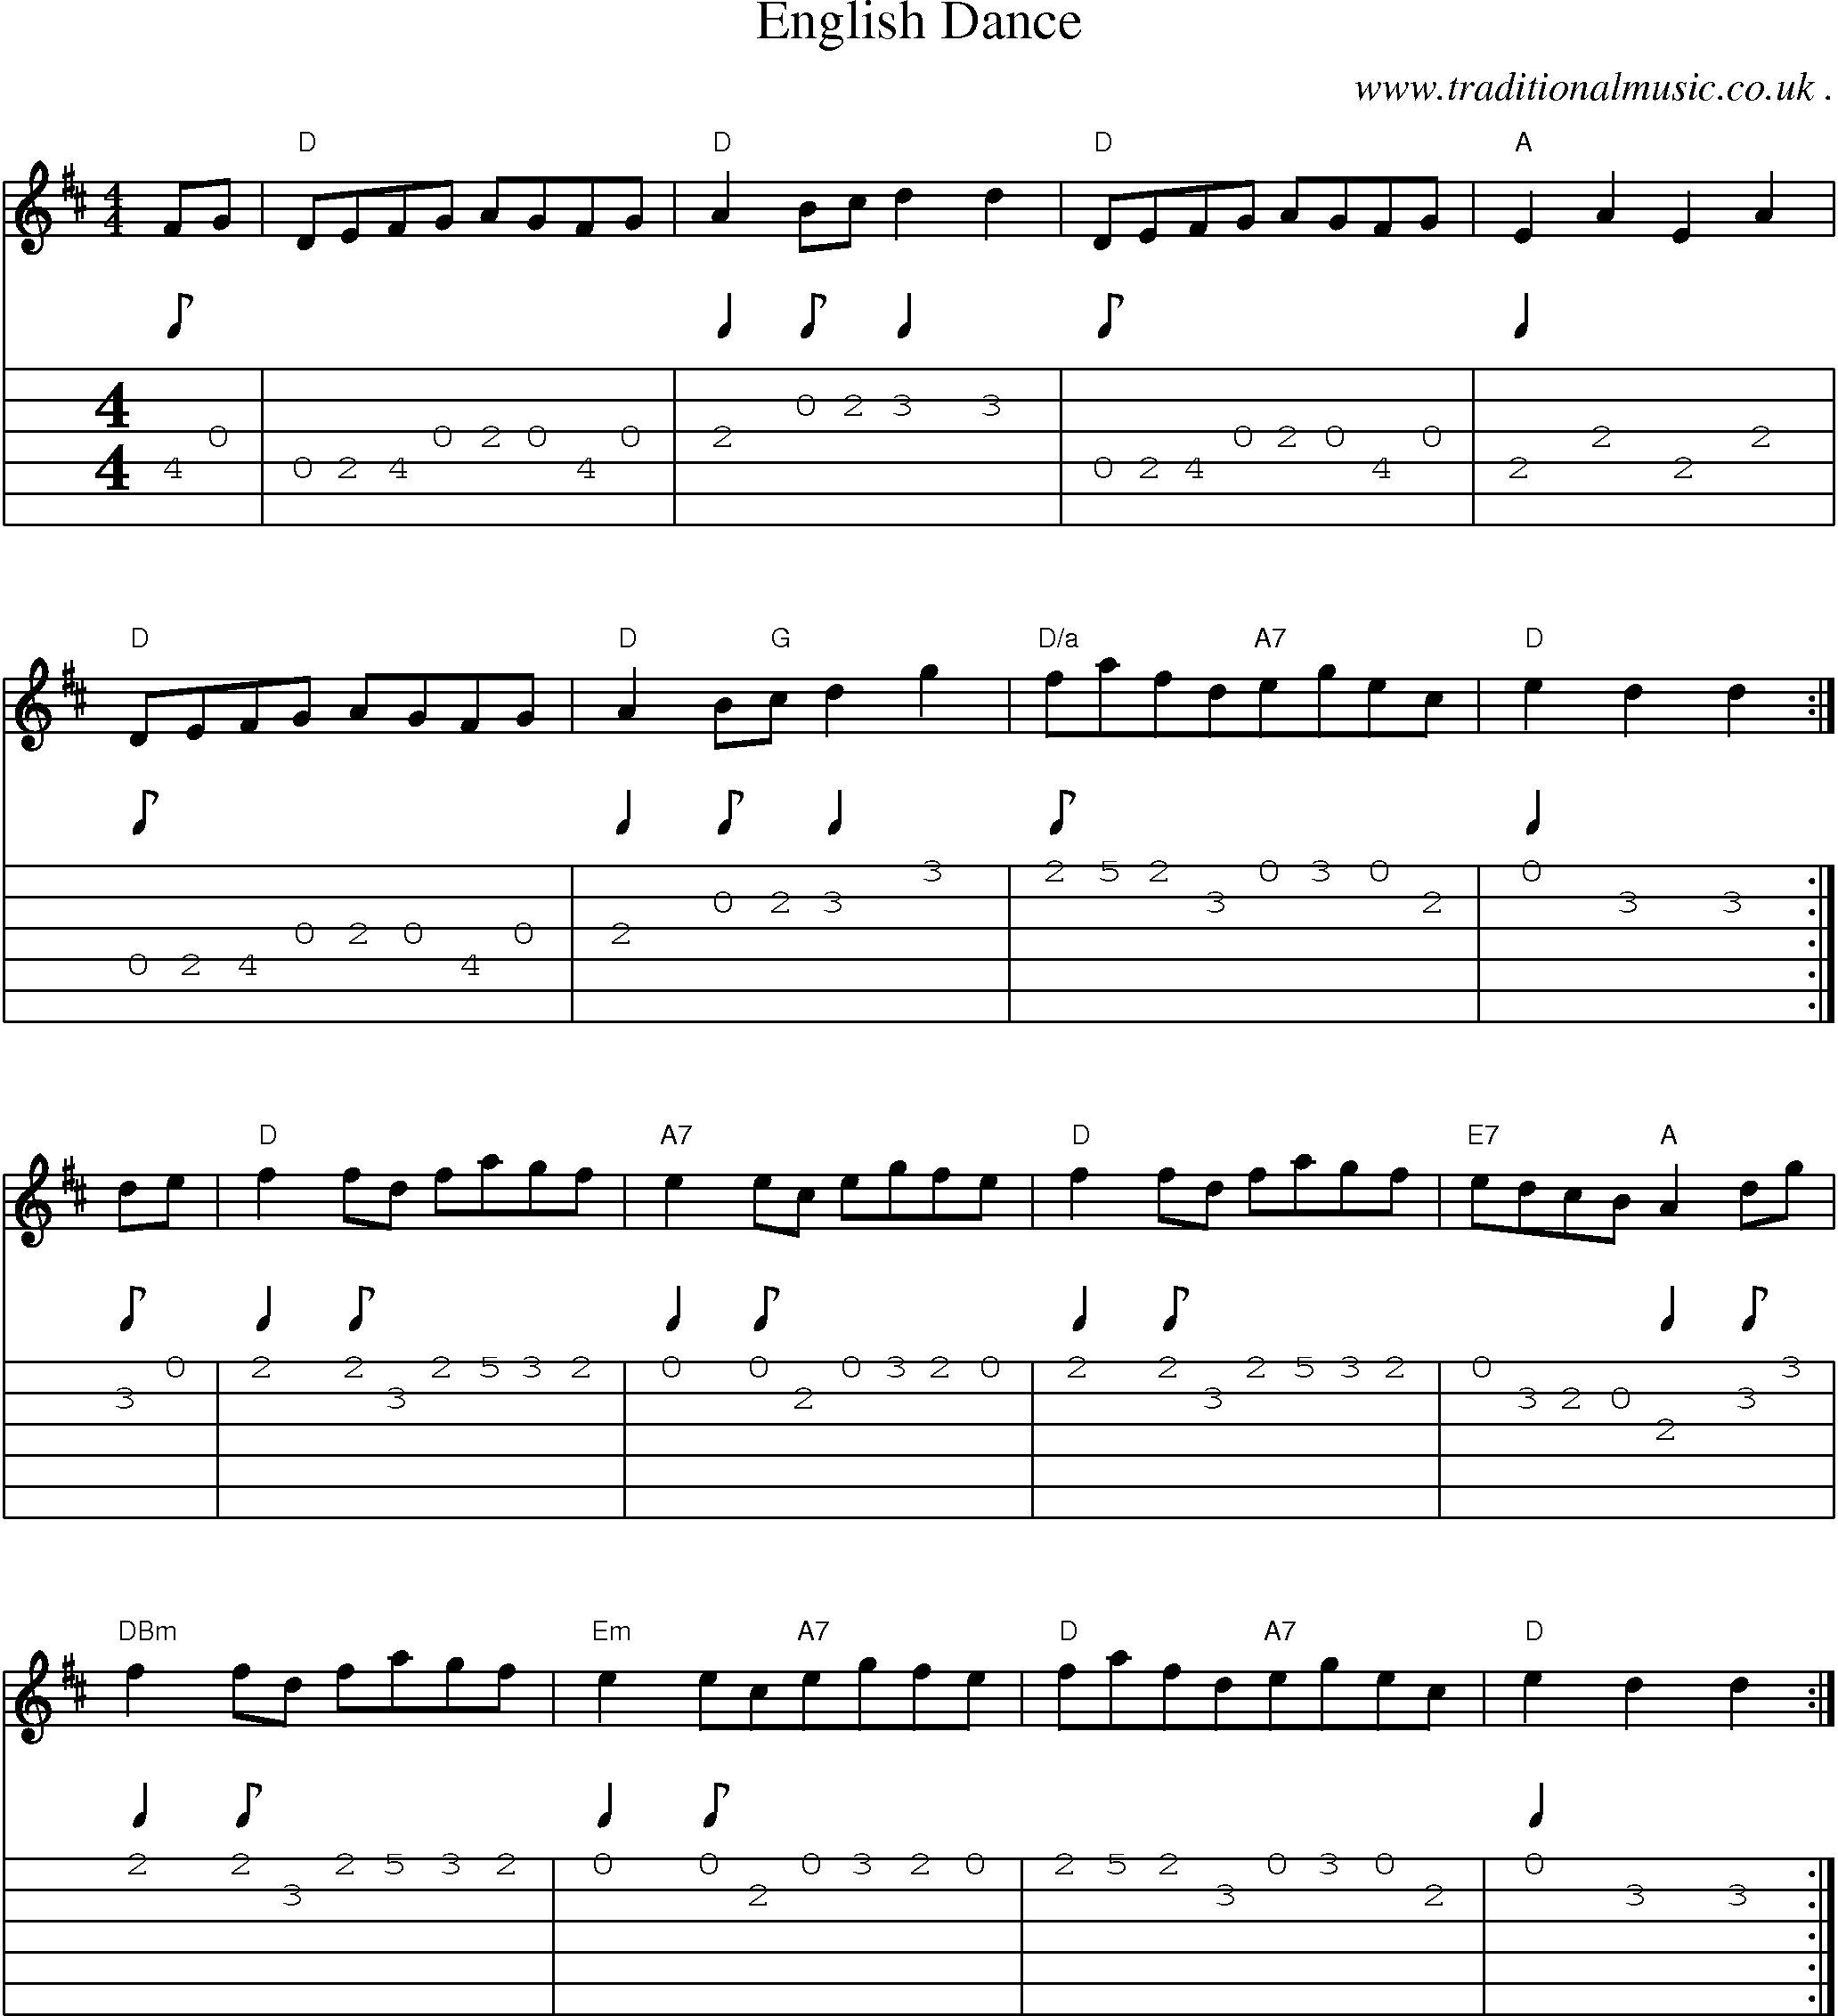 Sheet-Music and Guitar Tabs for English Dance